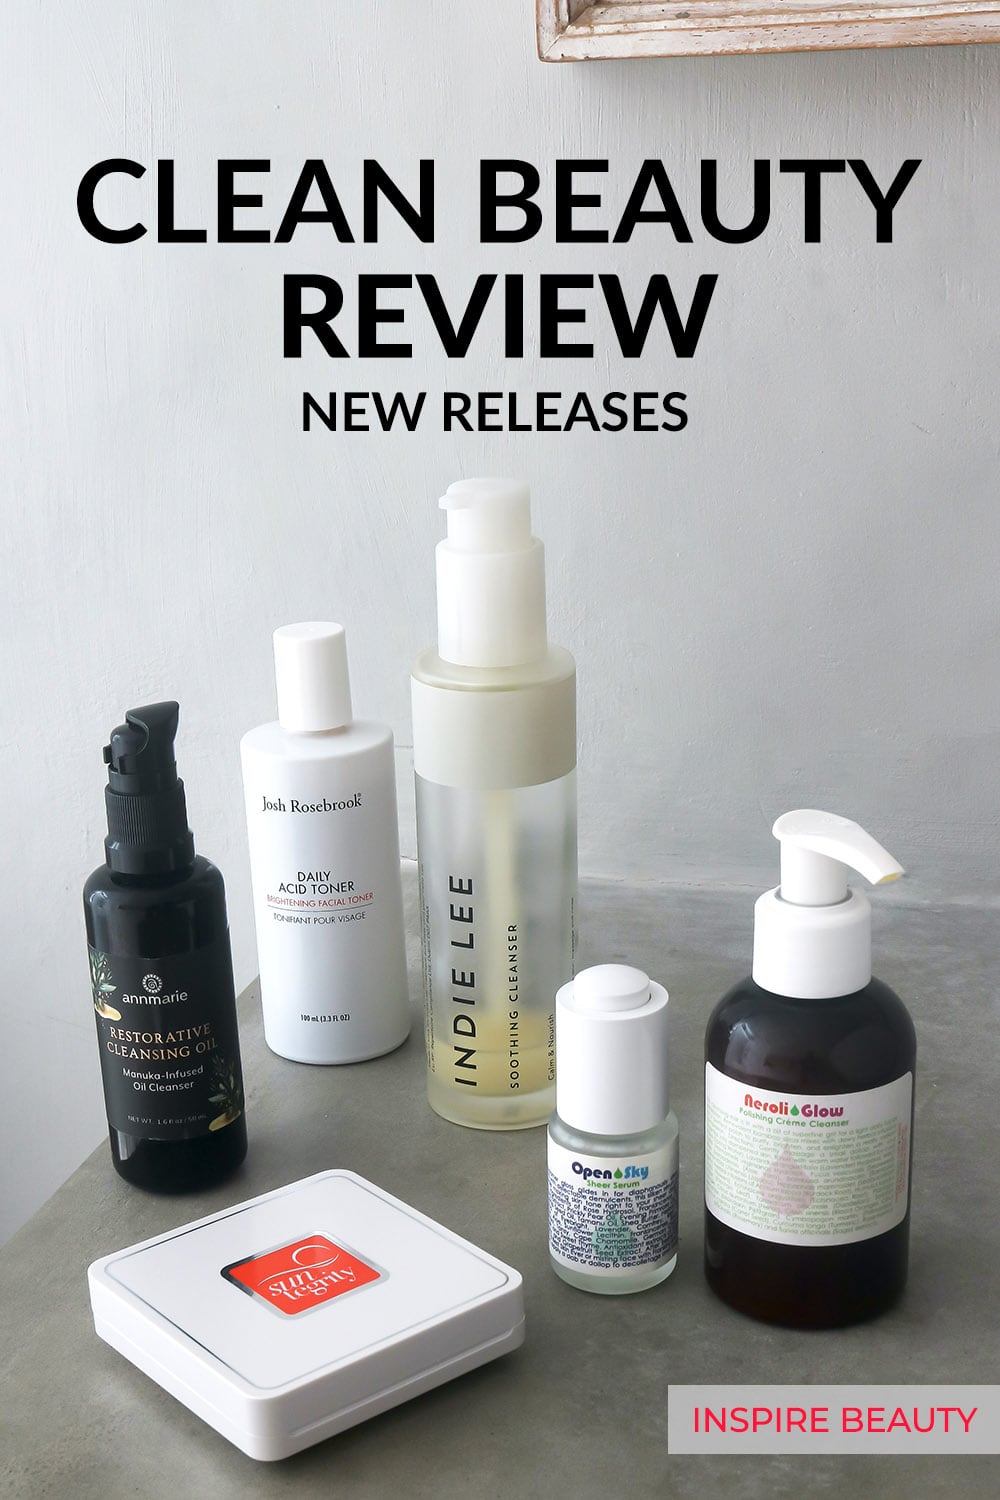 Review of new products from Living Libations, Sunetgrity, Josh Rosebrook, Indie Lee, Annmarie Skin Care